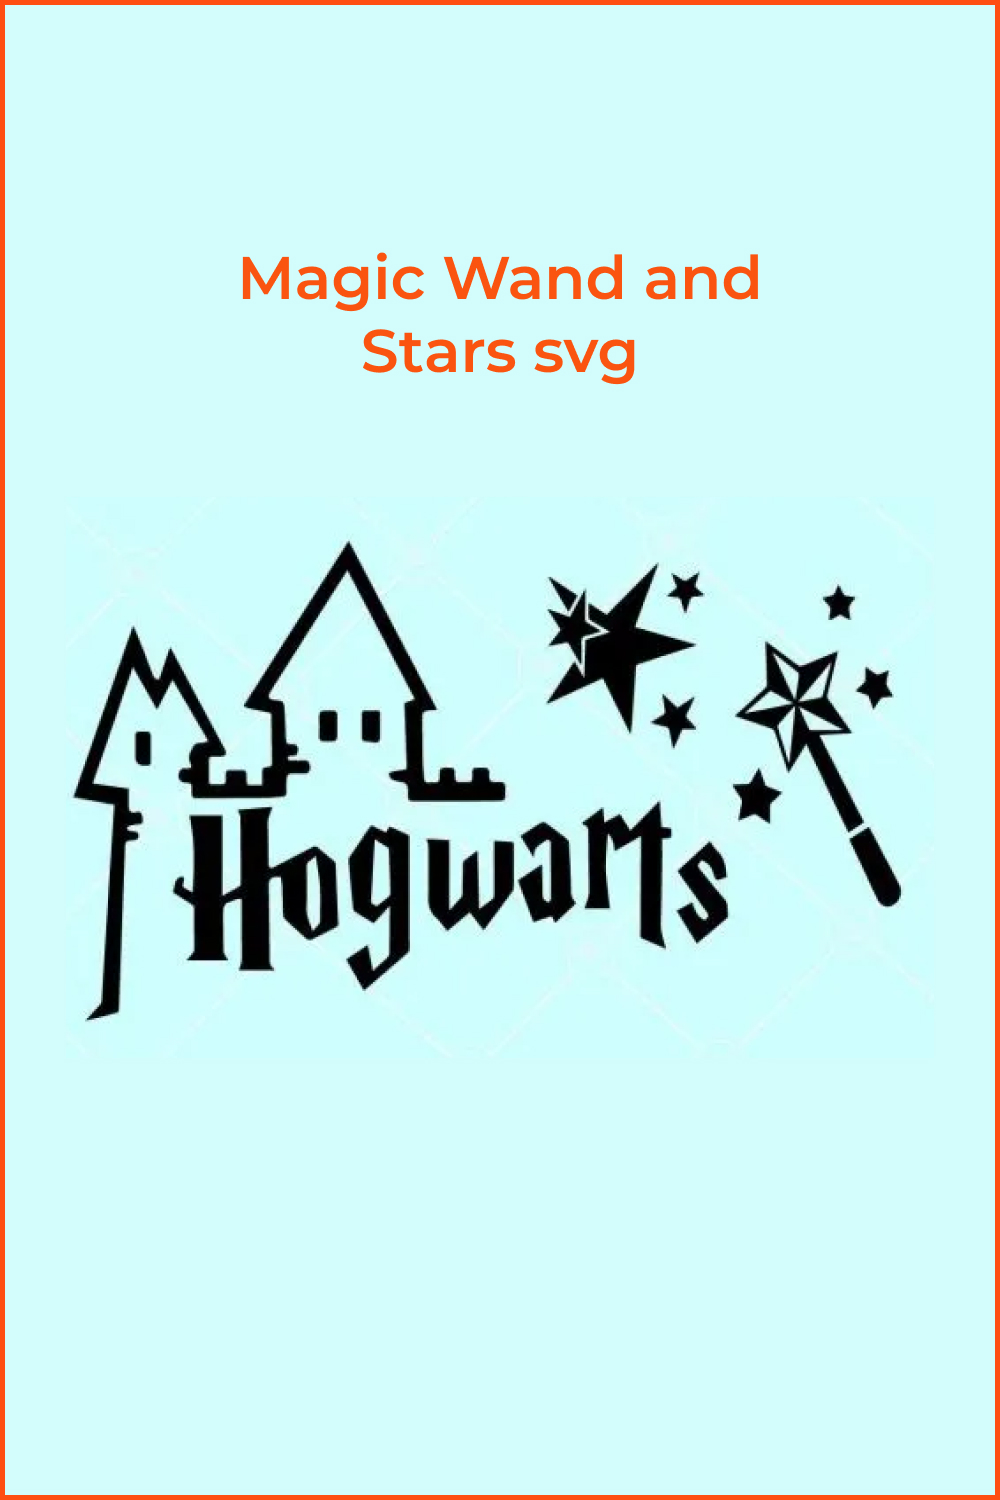 Image of Hogwarts outline and magic wand.